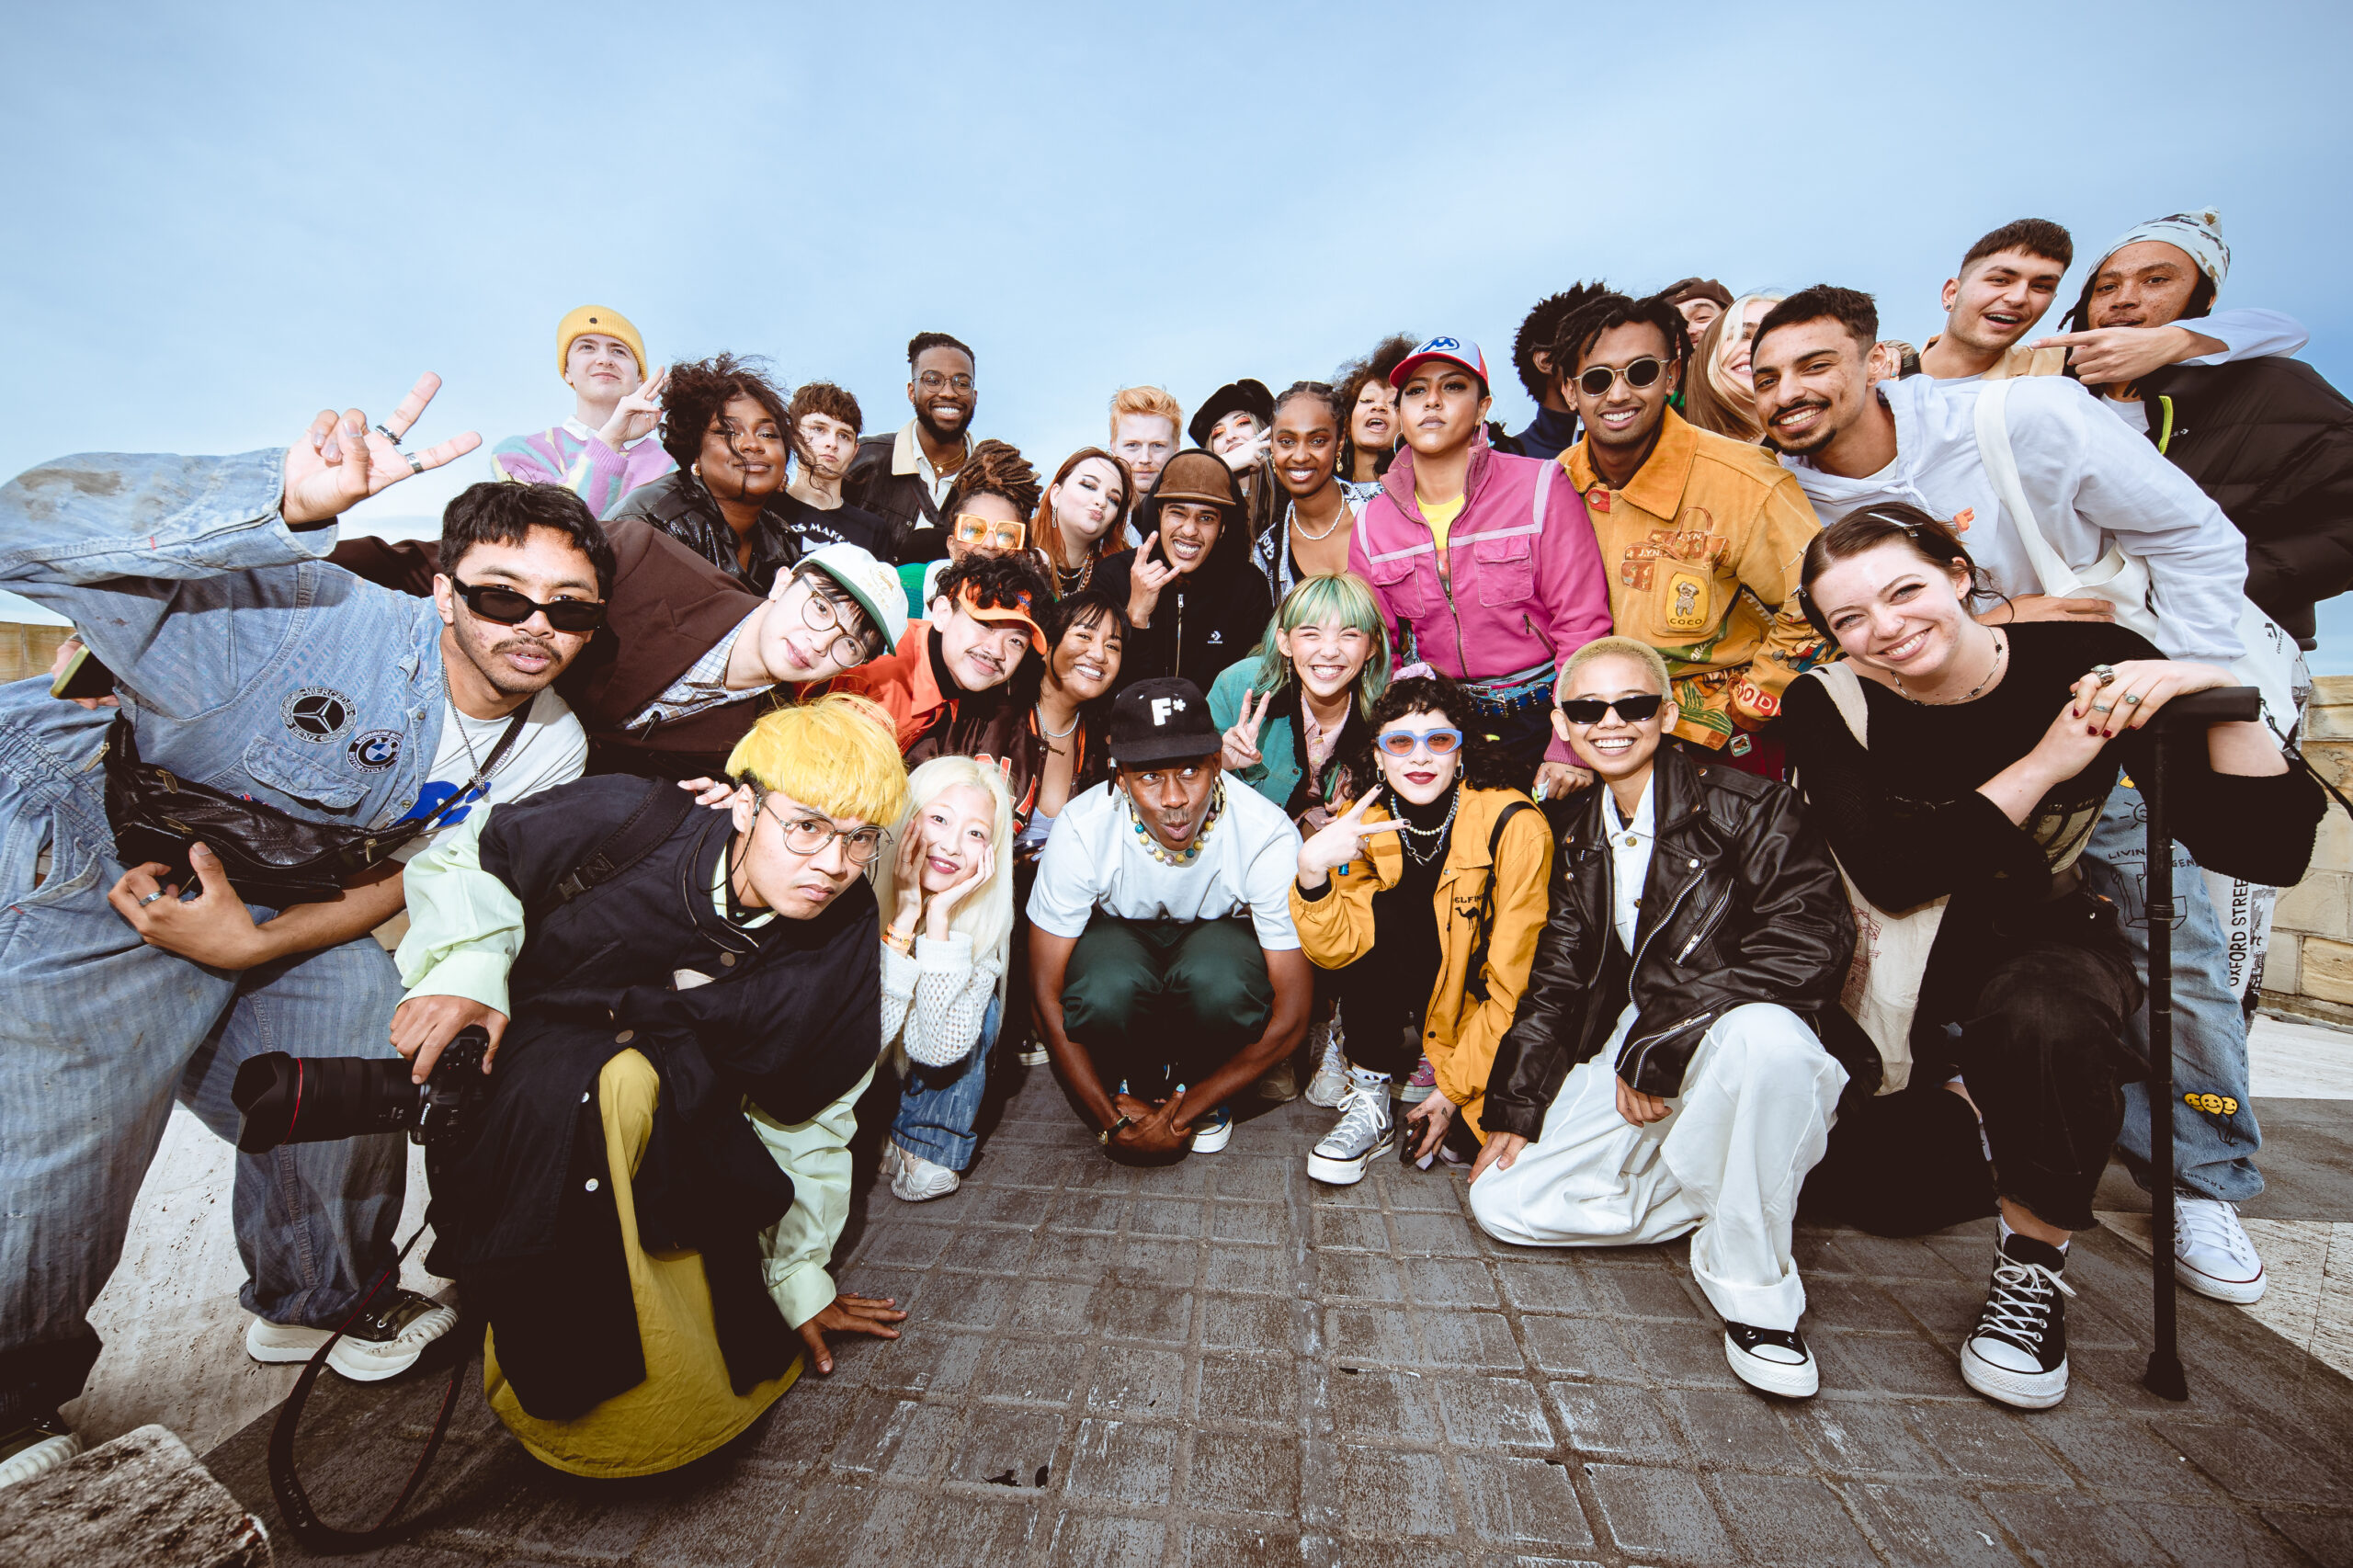 Conserveermiddel kortademigheid herfst Converse All Star Series brings Tyler, the Creator to meet young creatives  where they are | Marketing Mag